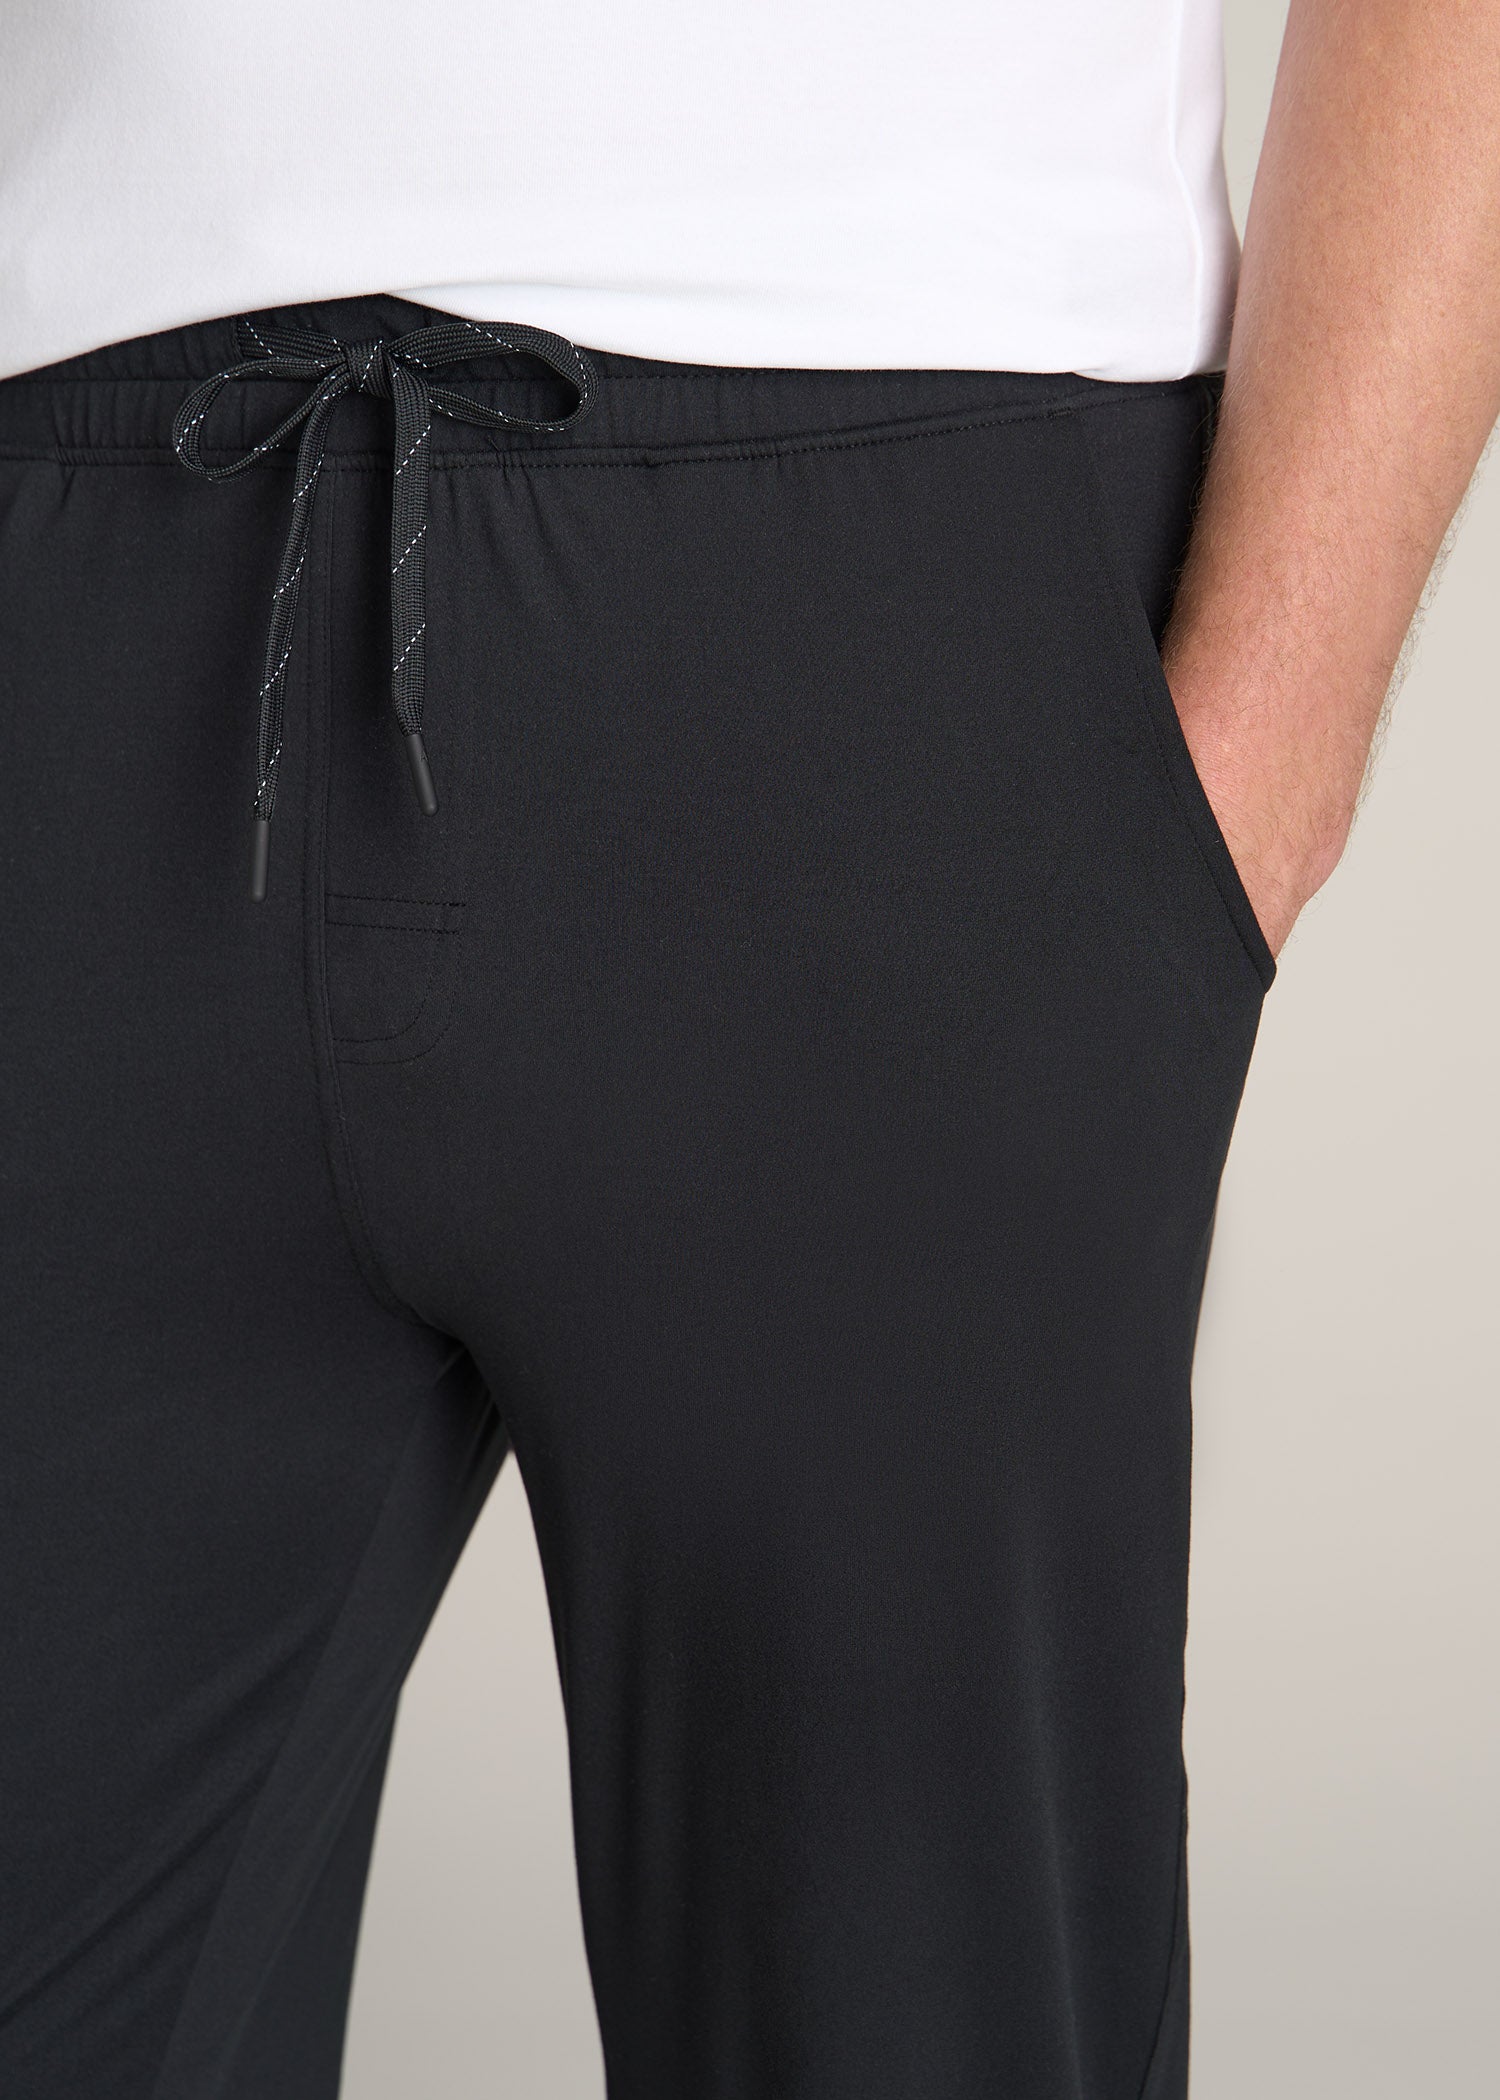 Lululemon Discovers What Men Have Always Known: Yoga Pants Are See